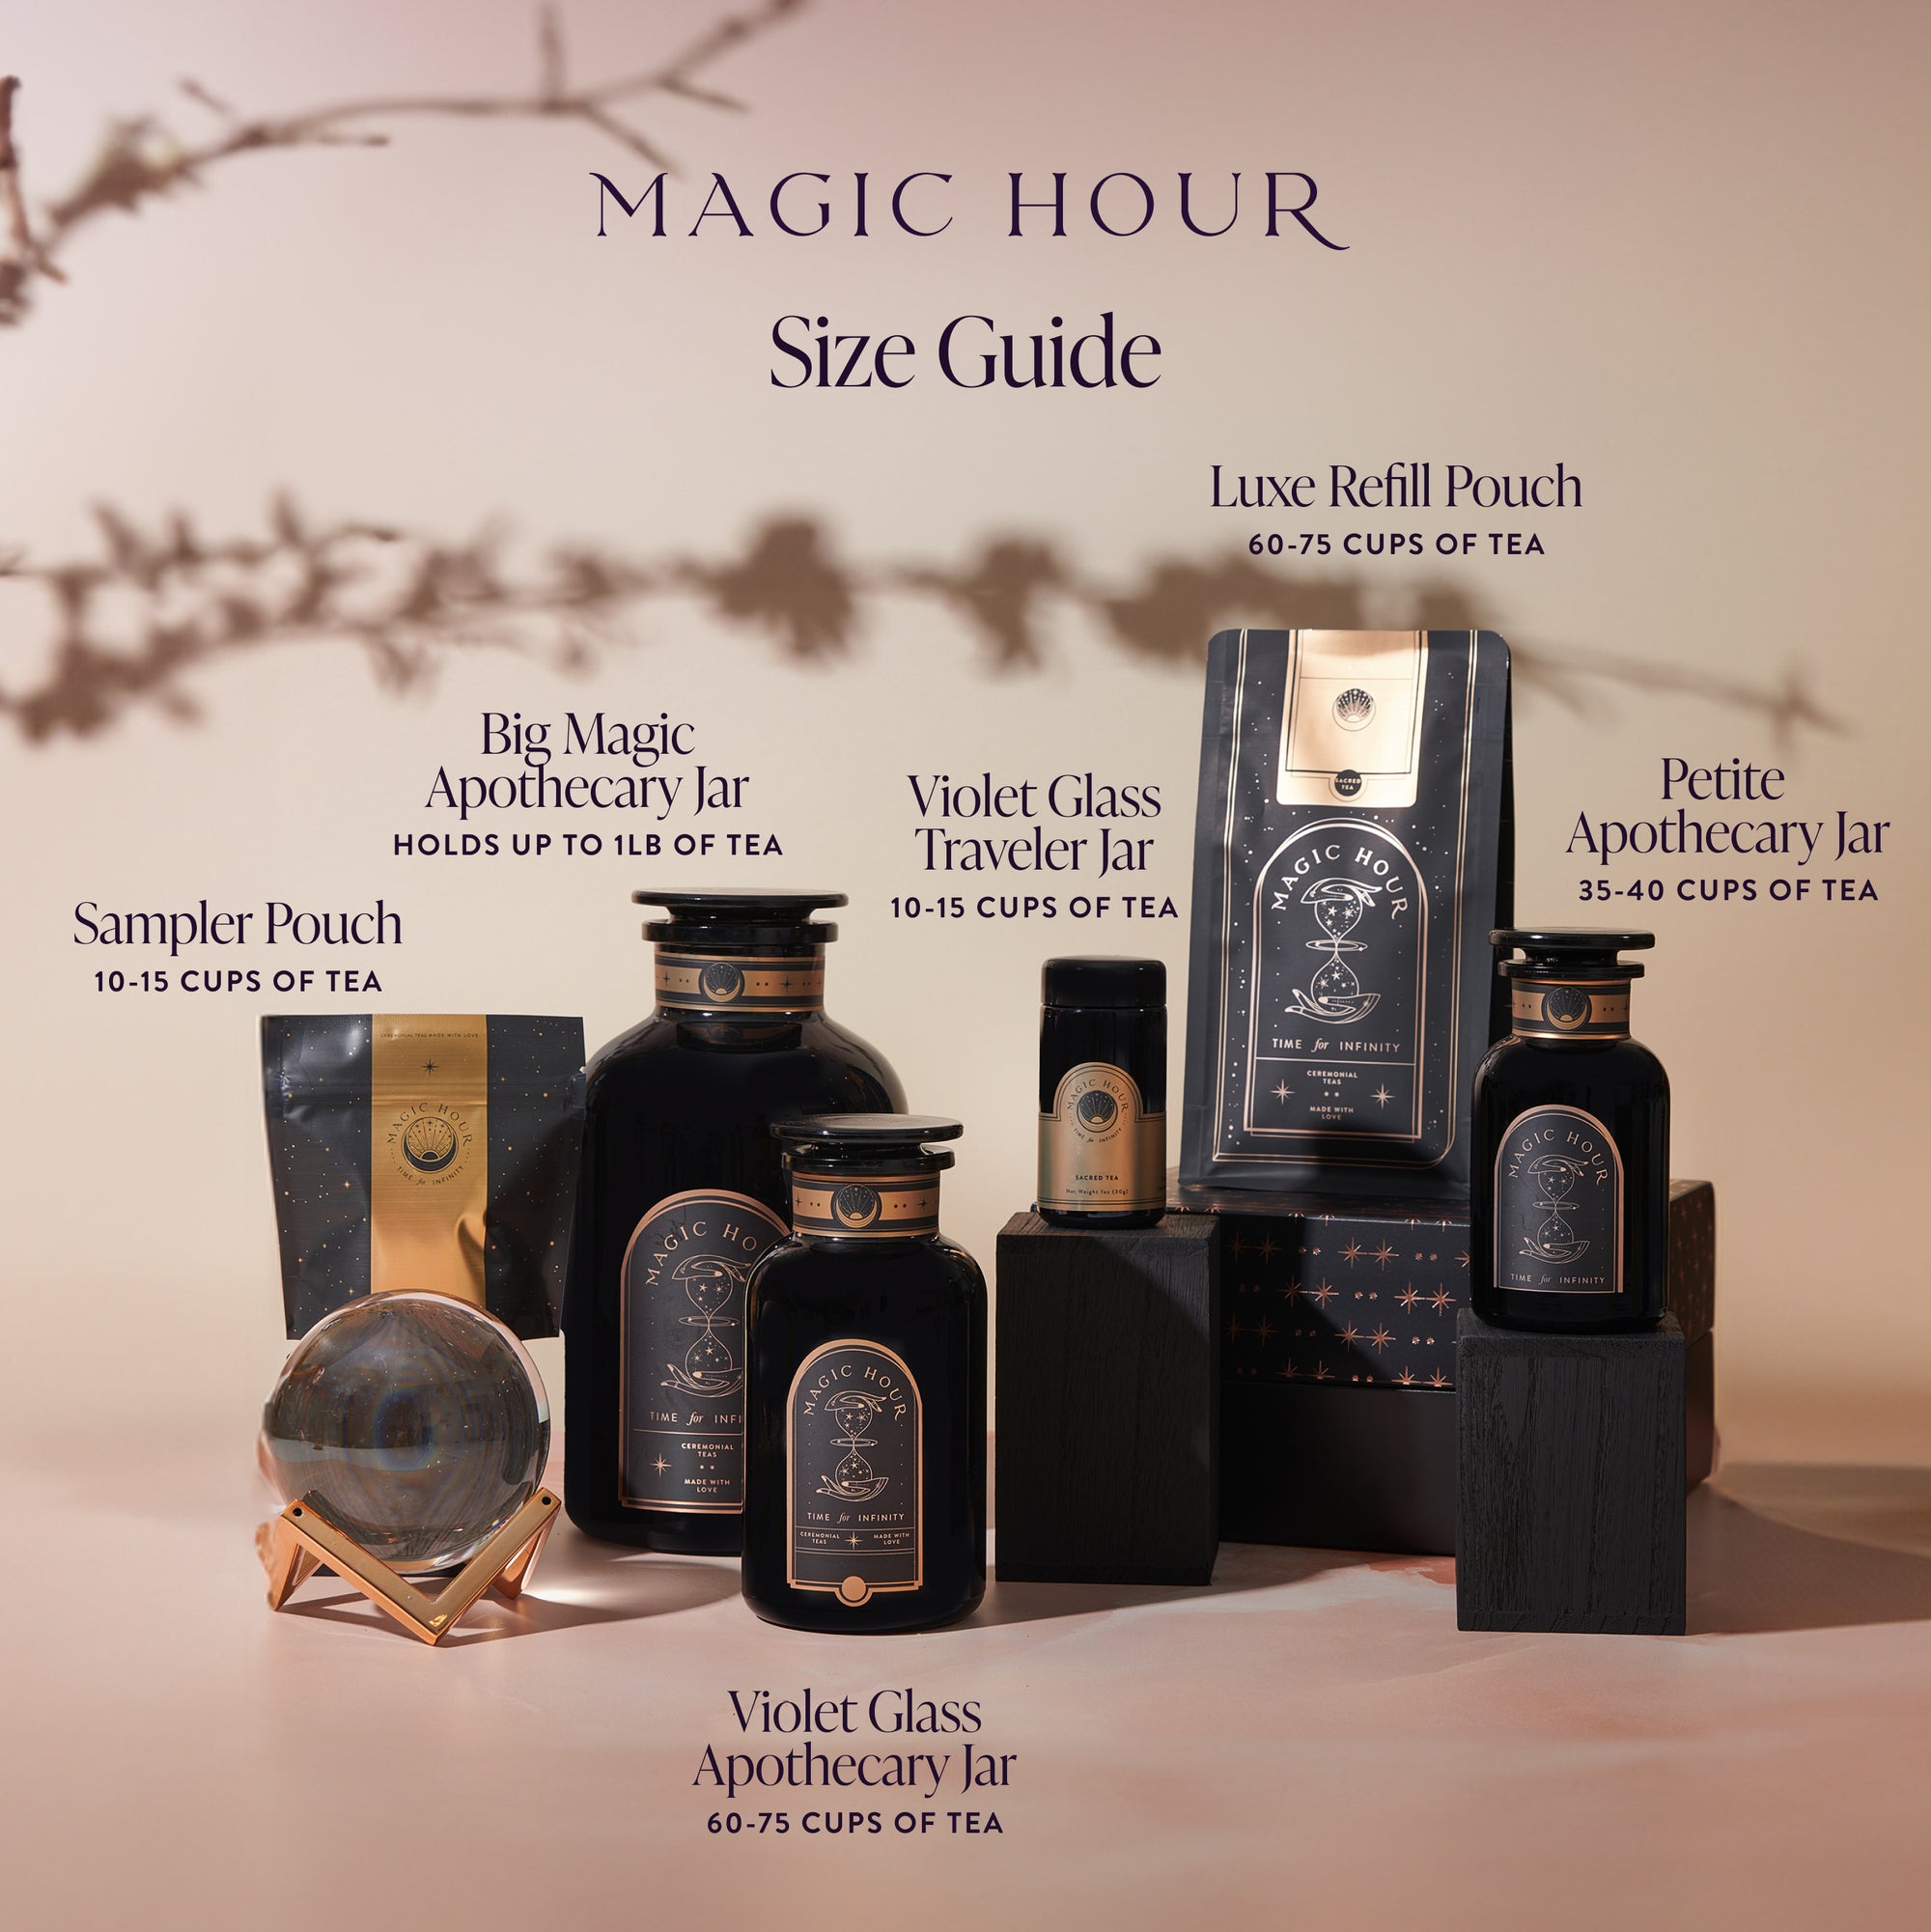 An arrangement of various black and gold Magic Hour tea containers under a branch&#39;s shadow. The containers, filled with Aquamarine Dream - Soothing Herbal Ayurvedic Adrenal Tonic, are labeled: Luxe Refill Pouch, Big Magic Apothecary Jar, Violet Glass Traveler Jar, Violet Glass Apothecary Jar, Petite Apothecary Jar, and Sampler Pouch. The text reads &quot;Magic Hour Tea Size Guide.